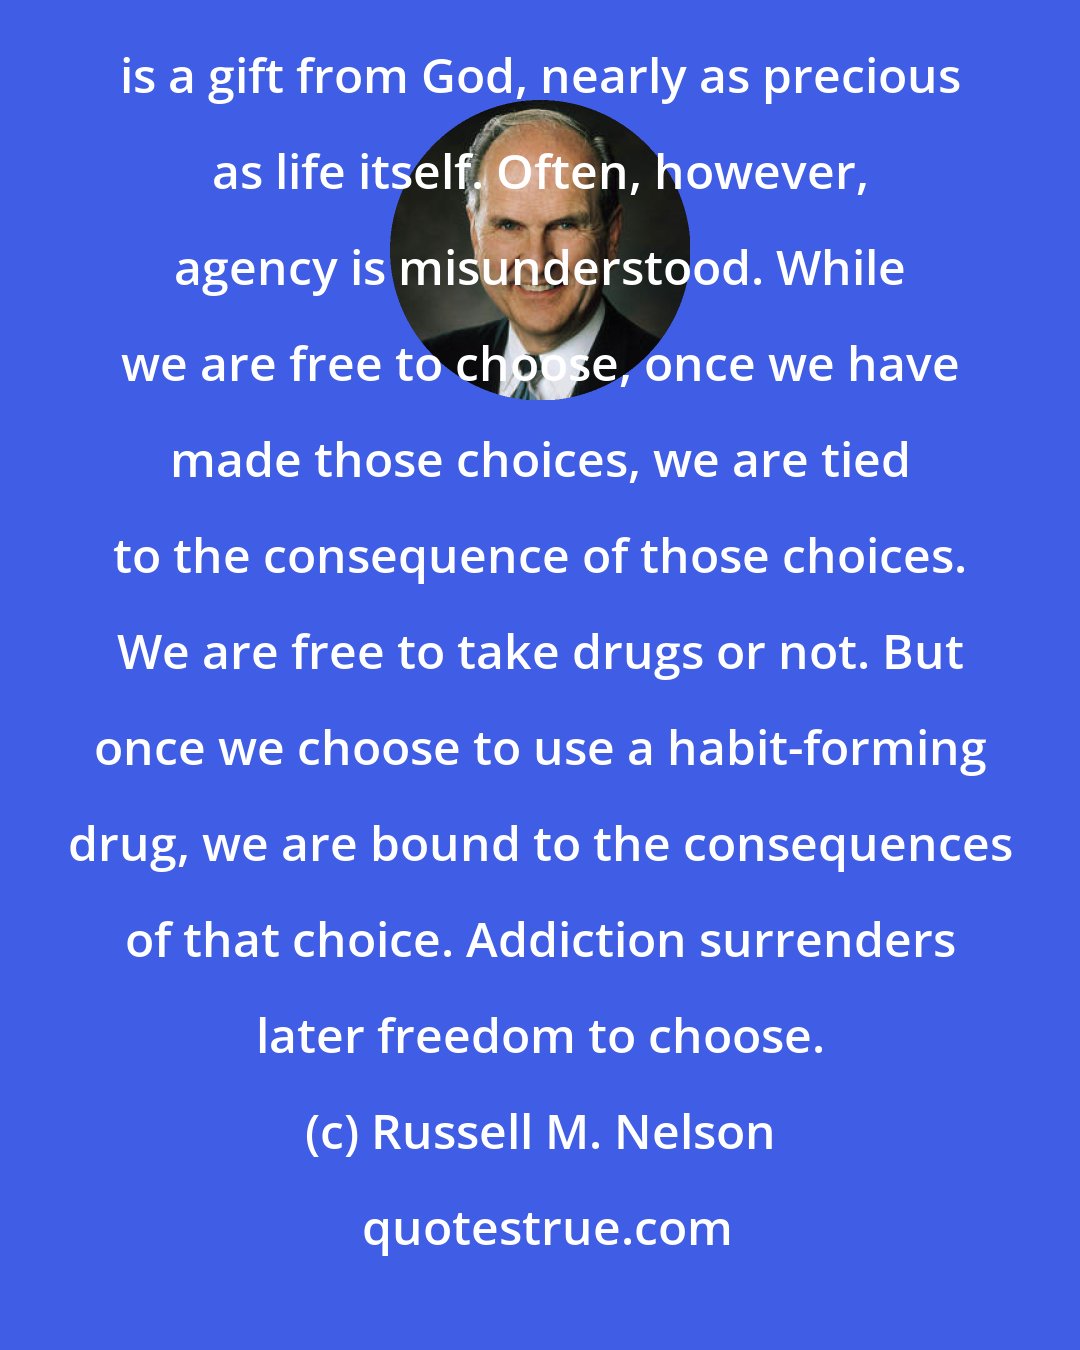 Russell M. Nelson: Agency, or the power to choose, was ours as spirit children of our Creator before the world was. It is a gift from God, nearly as precious as life itself. Often, however, agency is misunderstood. While we are free to choose, once we have made those choices, we are tied to the consequence of those choices. We are free to take drugs or not. But once we choose to use a habit-forming drug, we are bound to the consequences of that choice. Addiction surrenders later freedom to choose.